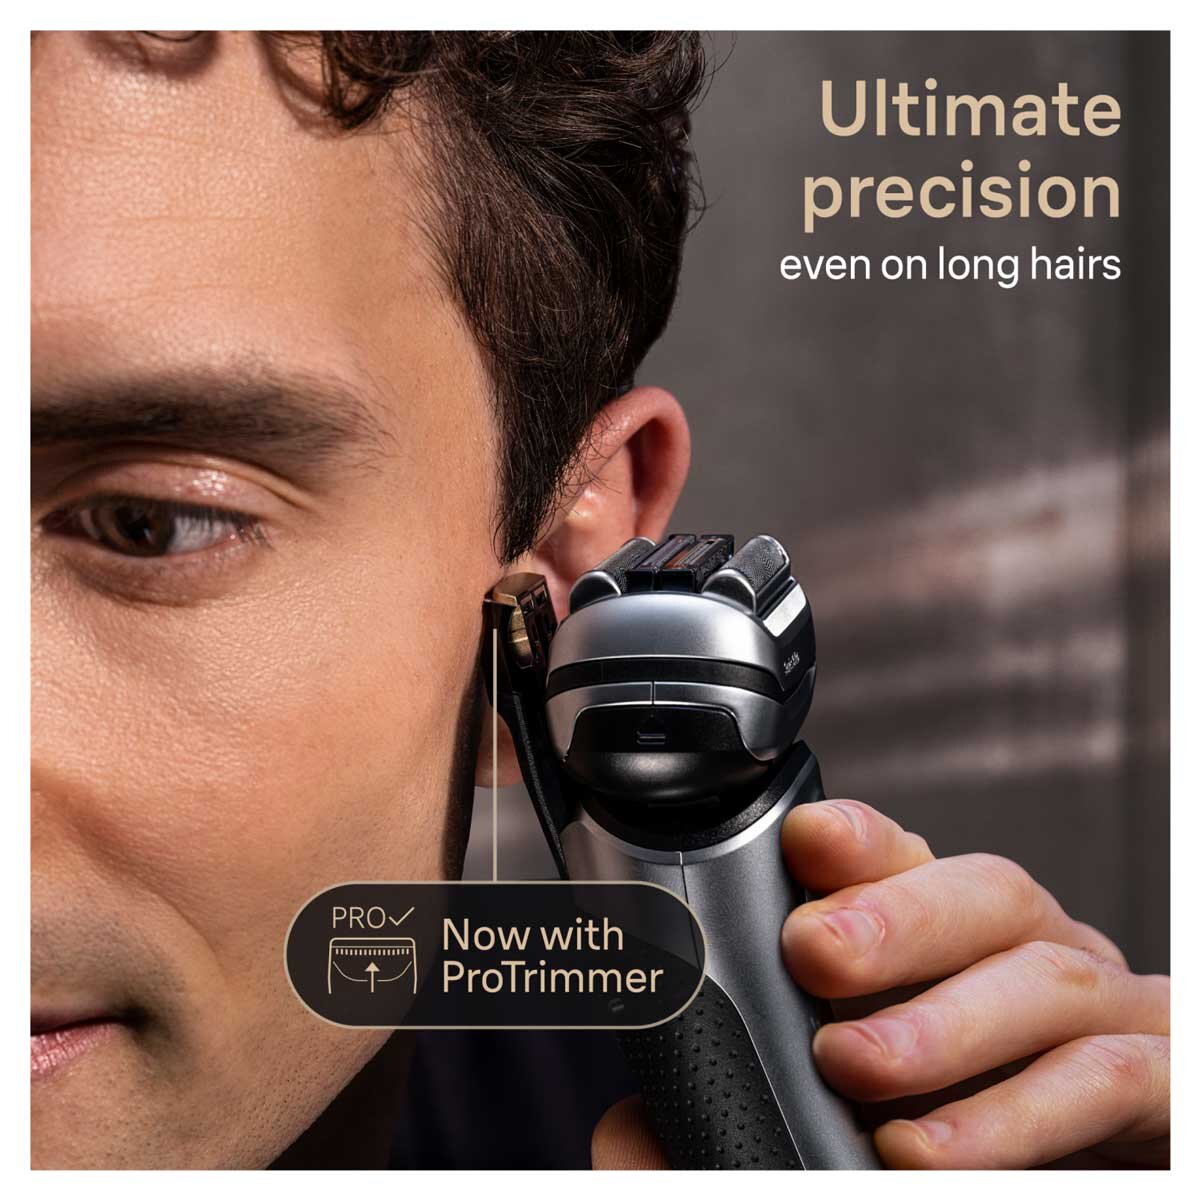 BRAUN MALE HAIR REMOVAL with a new innovation with a new ProHead  professional head, Braun, Brands